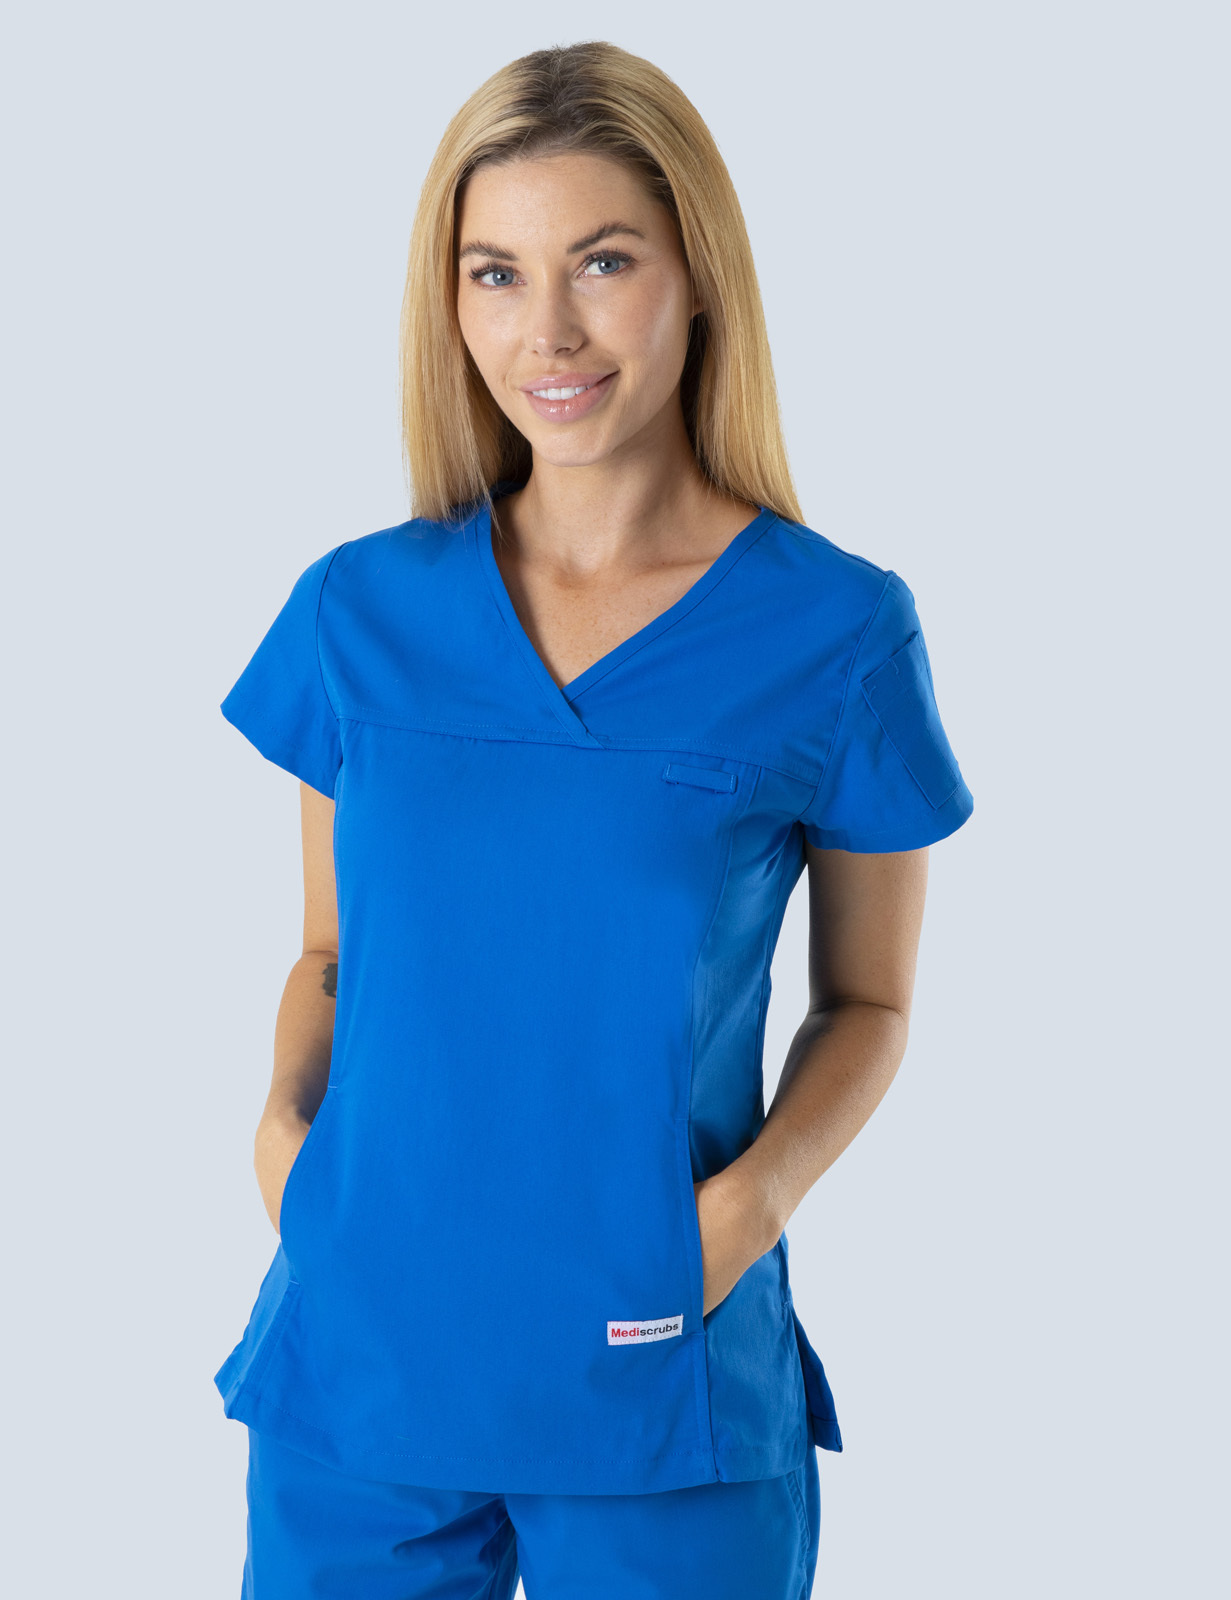 Mayfield Aged Care Emergency Department Nurse Practitioner Uniform Set Bundle (Women's Fit Solid Top and Cargo Pants in Royal incl Logo)